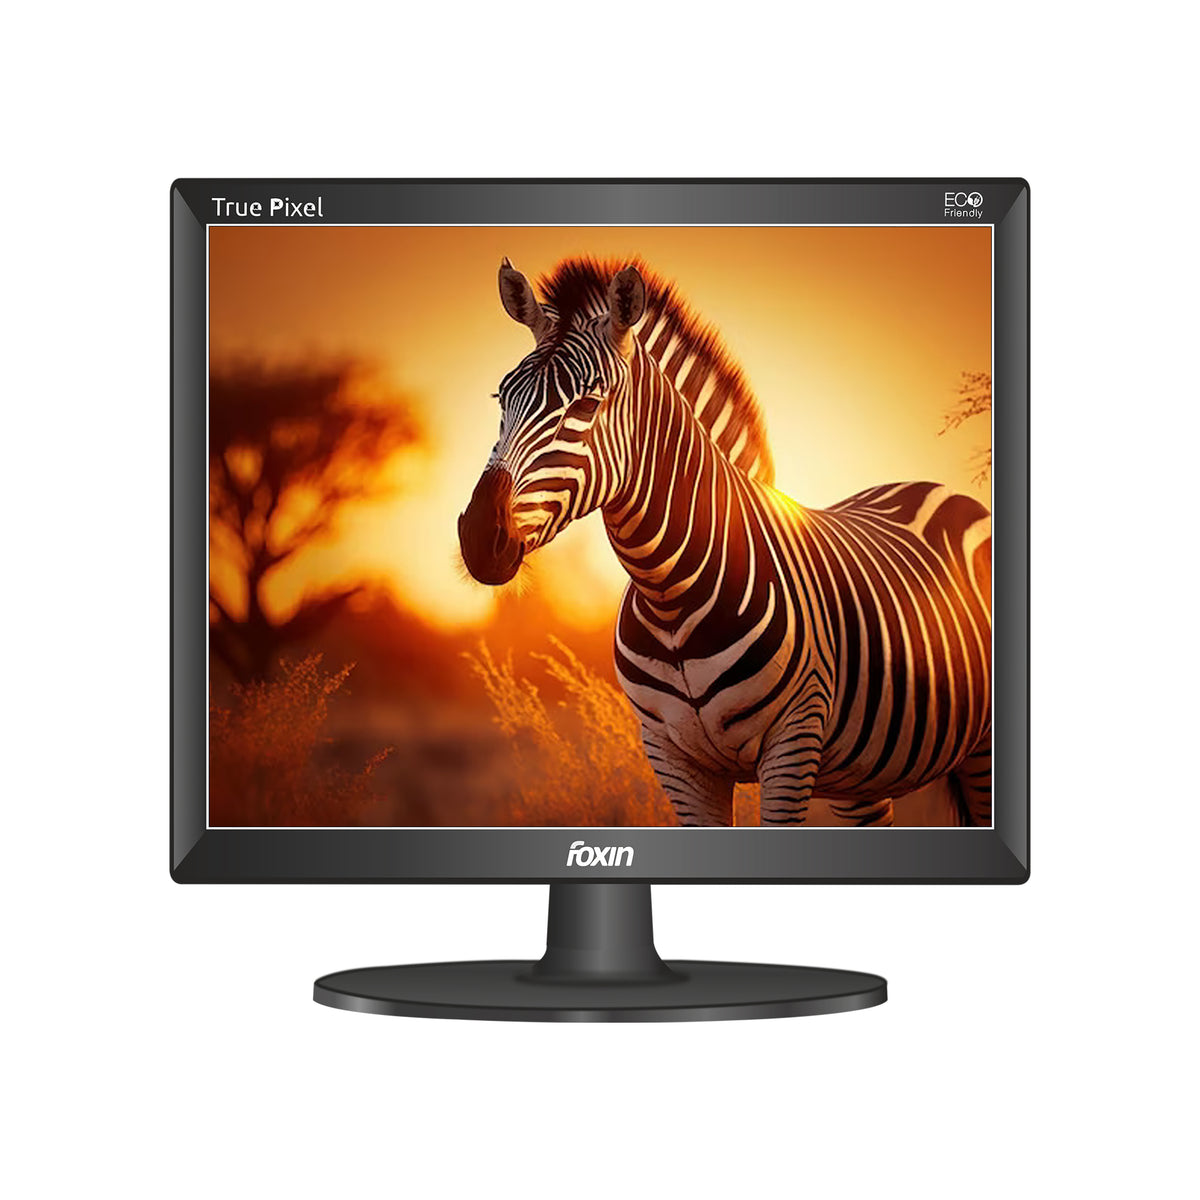 Foxin FM 1750 Crystal SQ 43.5 cm (17.5 Inch) Black HD Computer Monitor with VGA and HDMI Ports 